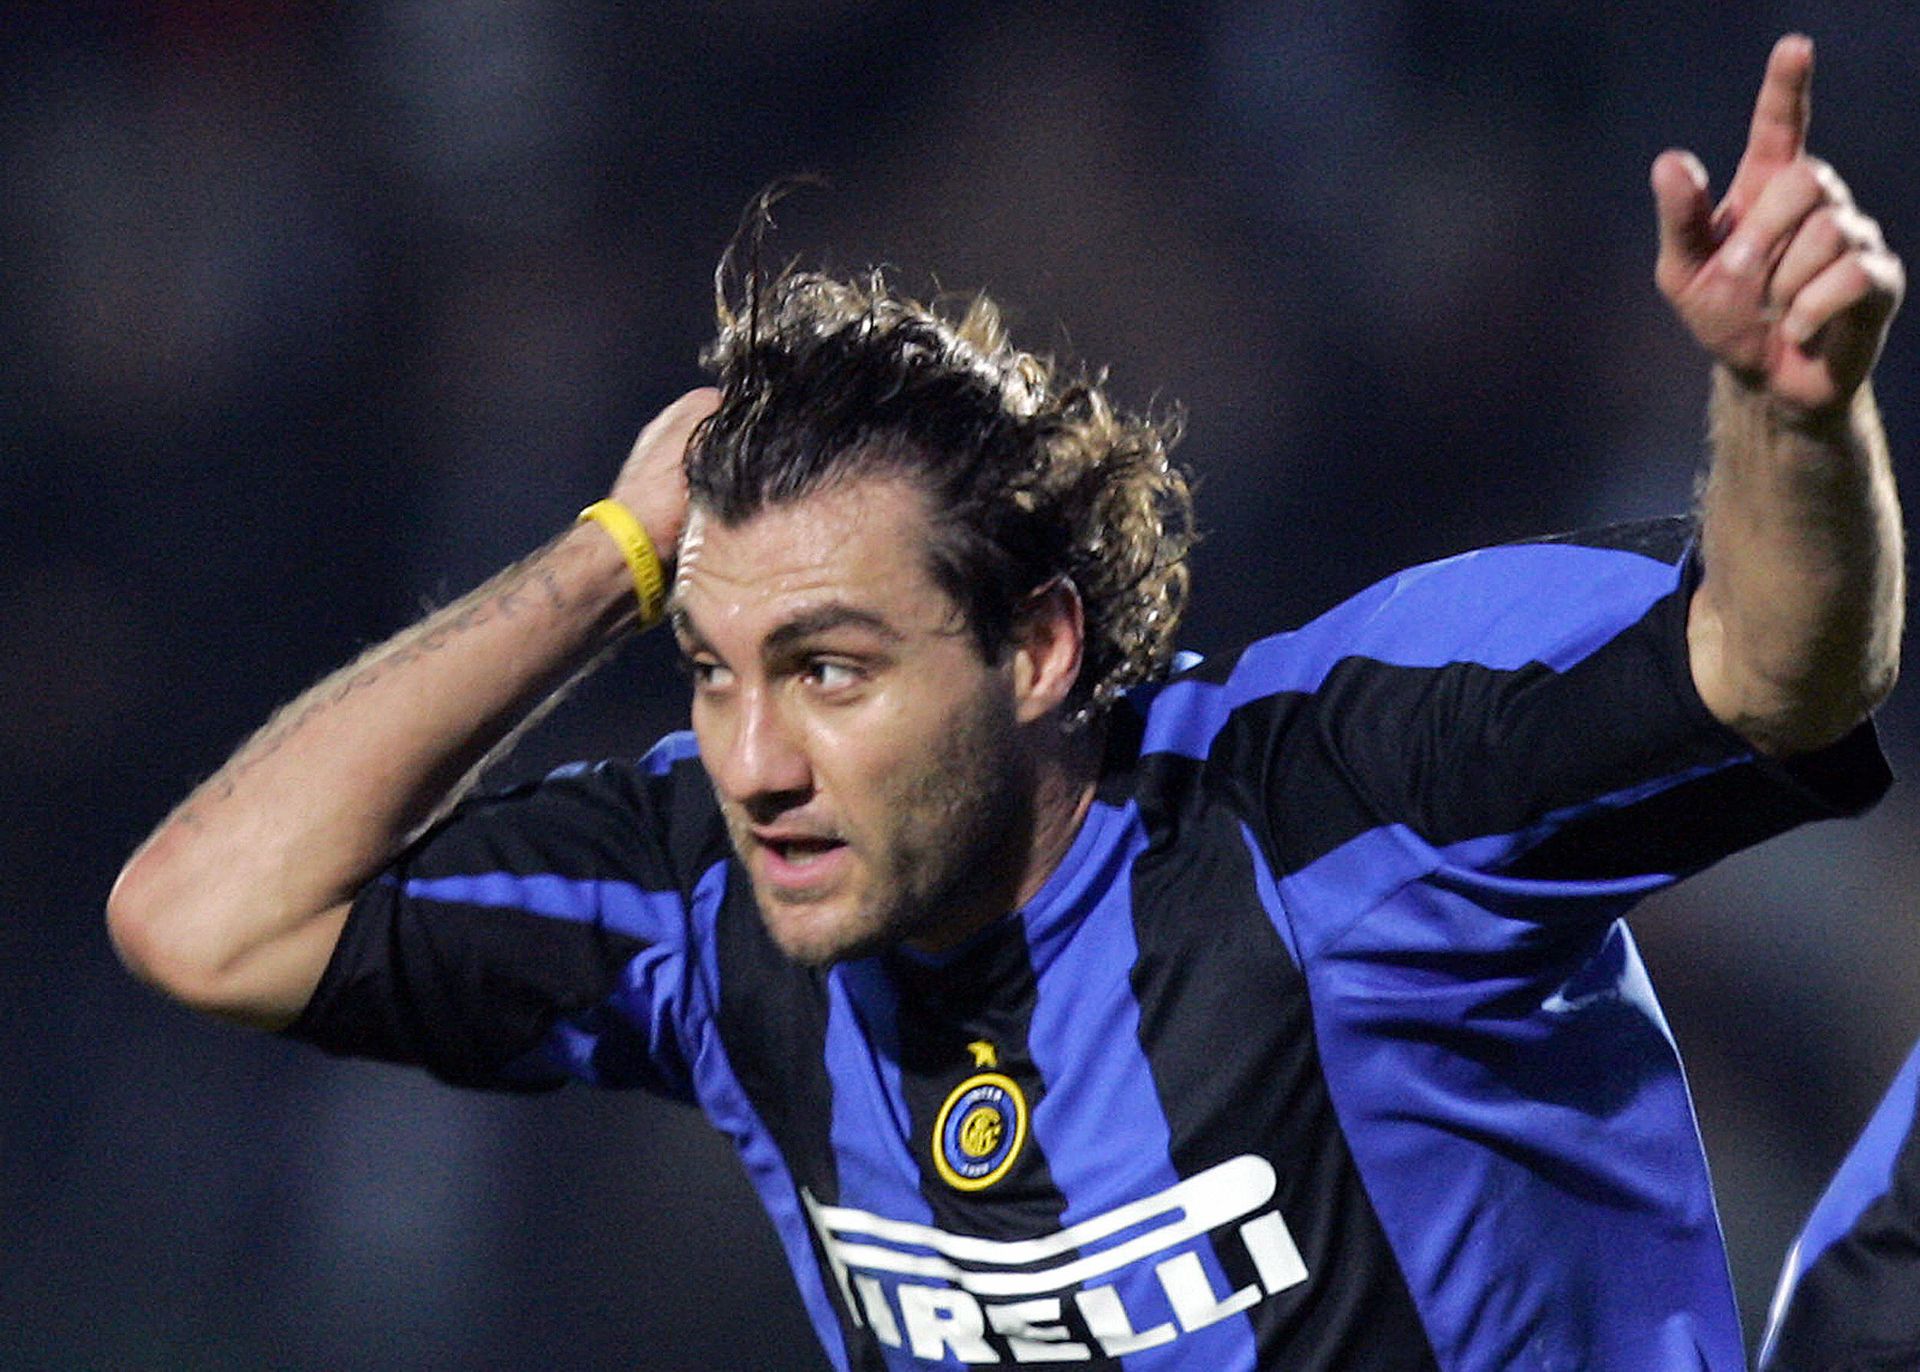 <p>                     Him again. Christian Vieri accumulated €87.5 million in transfer fees in four big-money moves and over half of that came as the Italian striker joined Inter from Lazio in 1999.                   </p>                                      <p>                     Inter paid a world record fee of €46.48m for Vieri and Lazio made a profit of over €20m in the space of a year. It was money well spent, too, as Vieri went on to score 123 goals in 190 games for the Nerazzurri.                   </p>